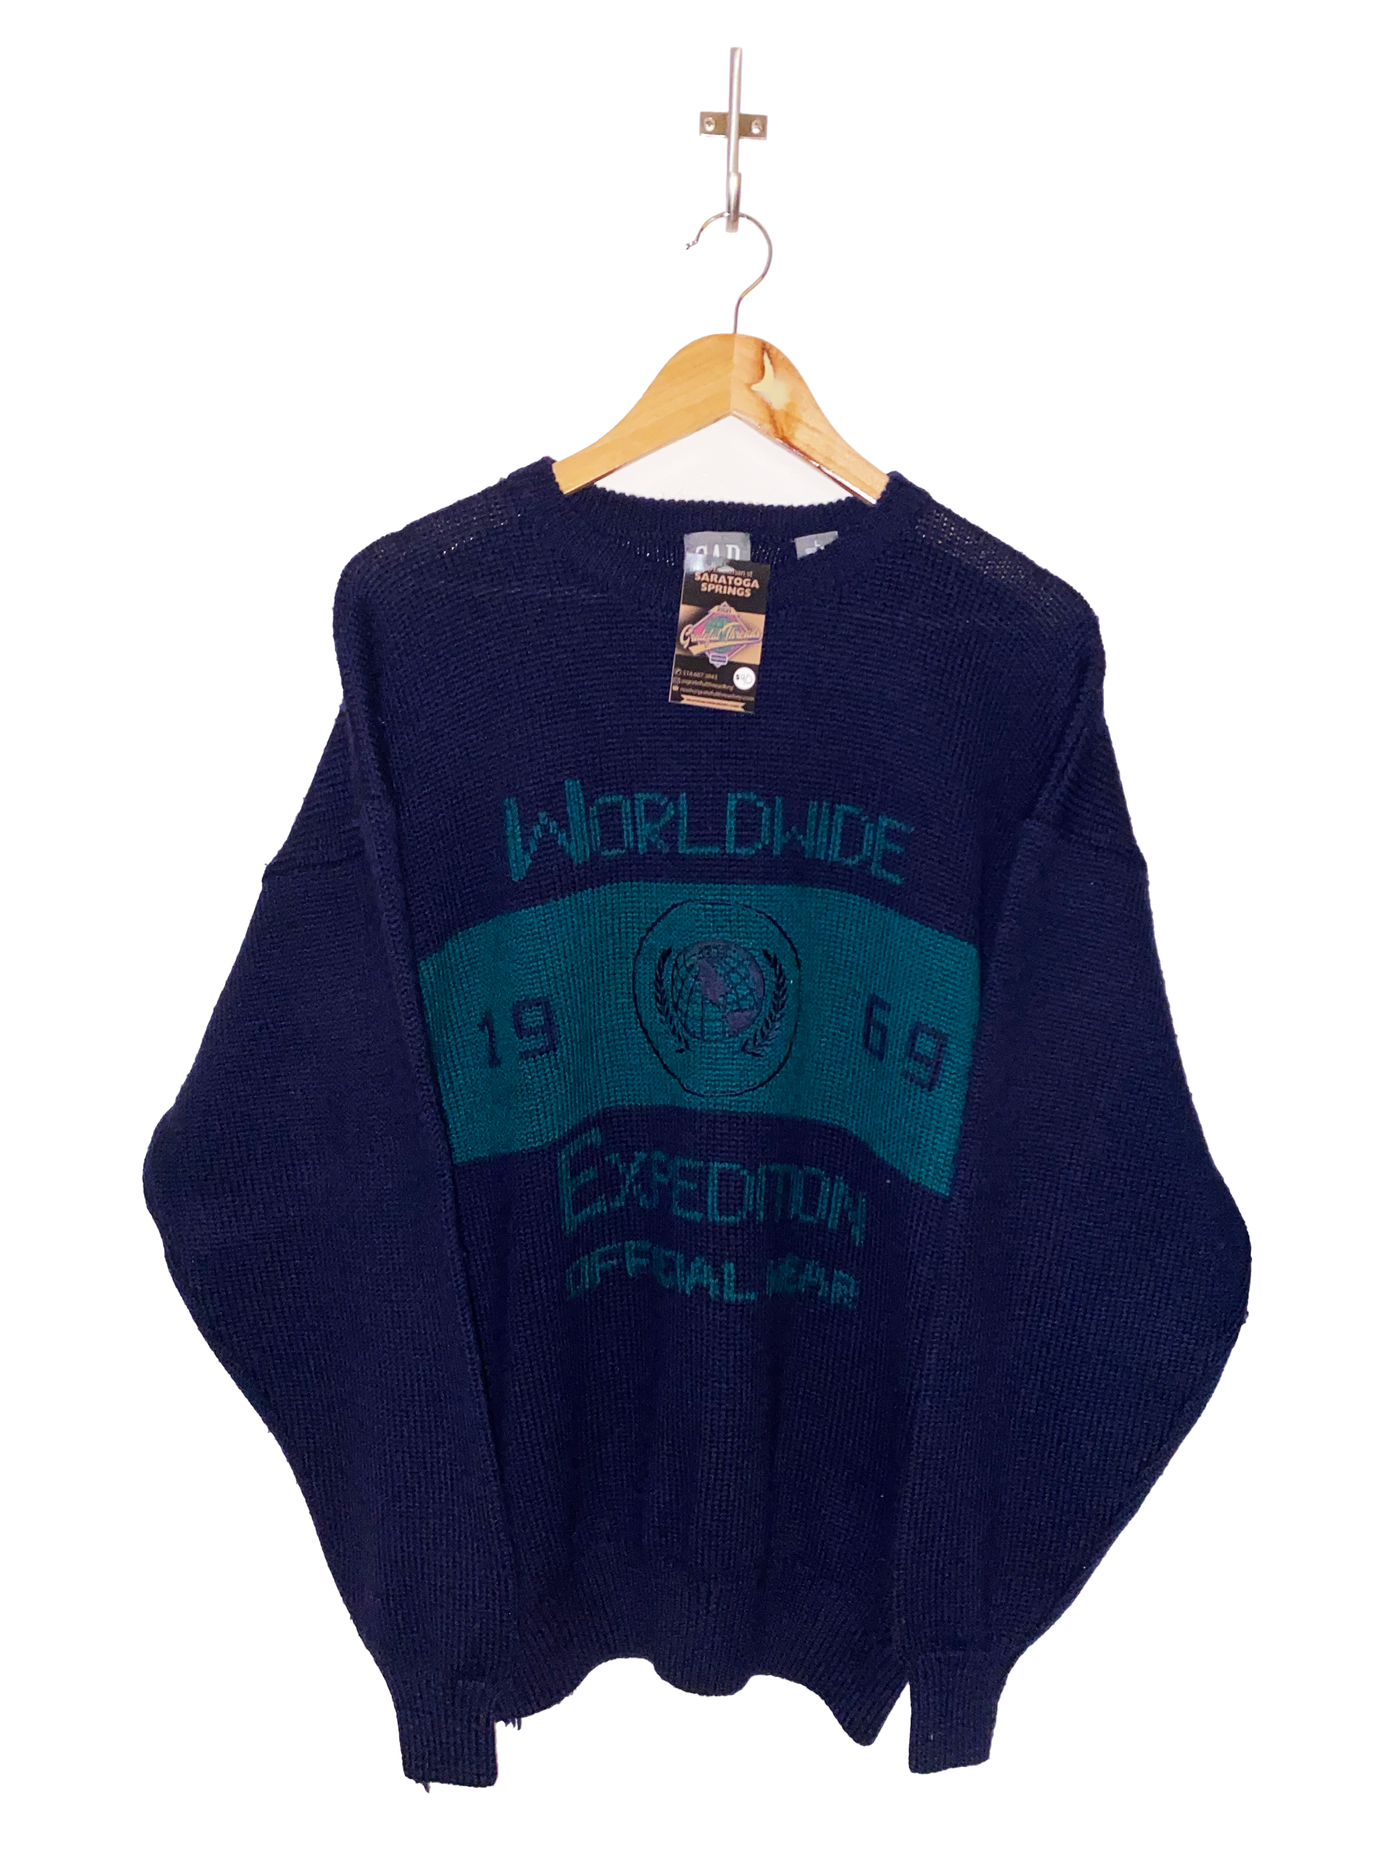 Vintage 90s Gap Knit Expedition Gear Sweater